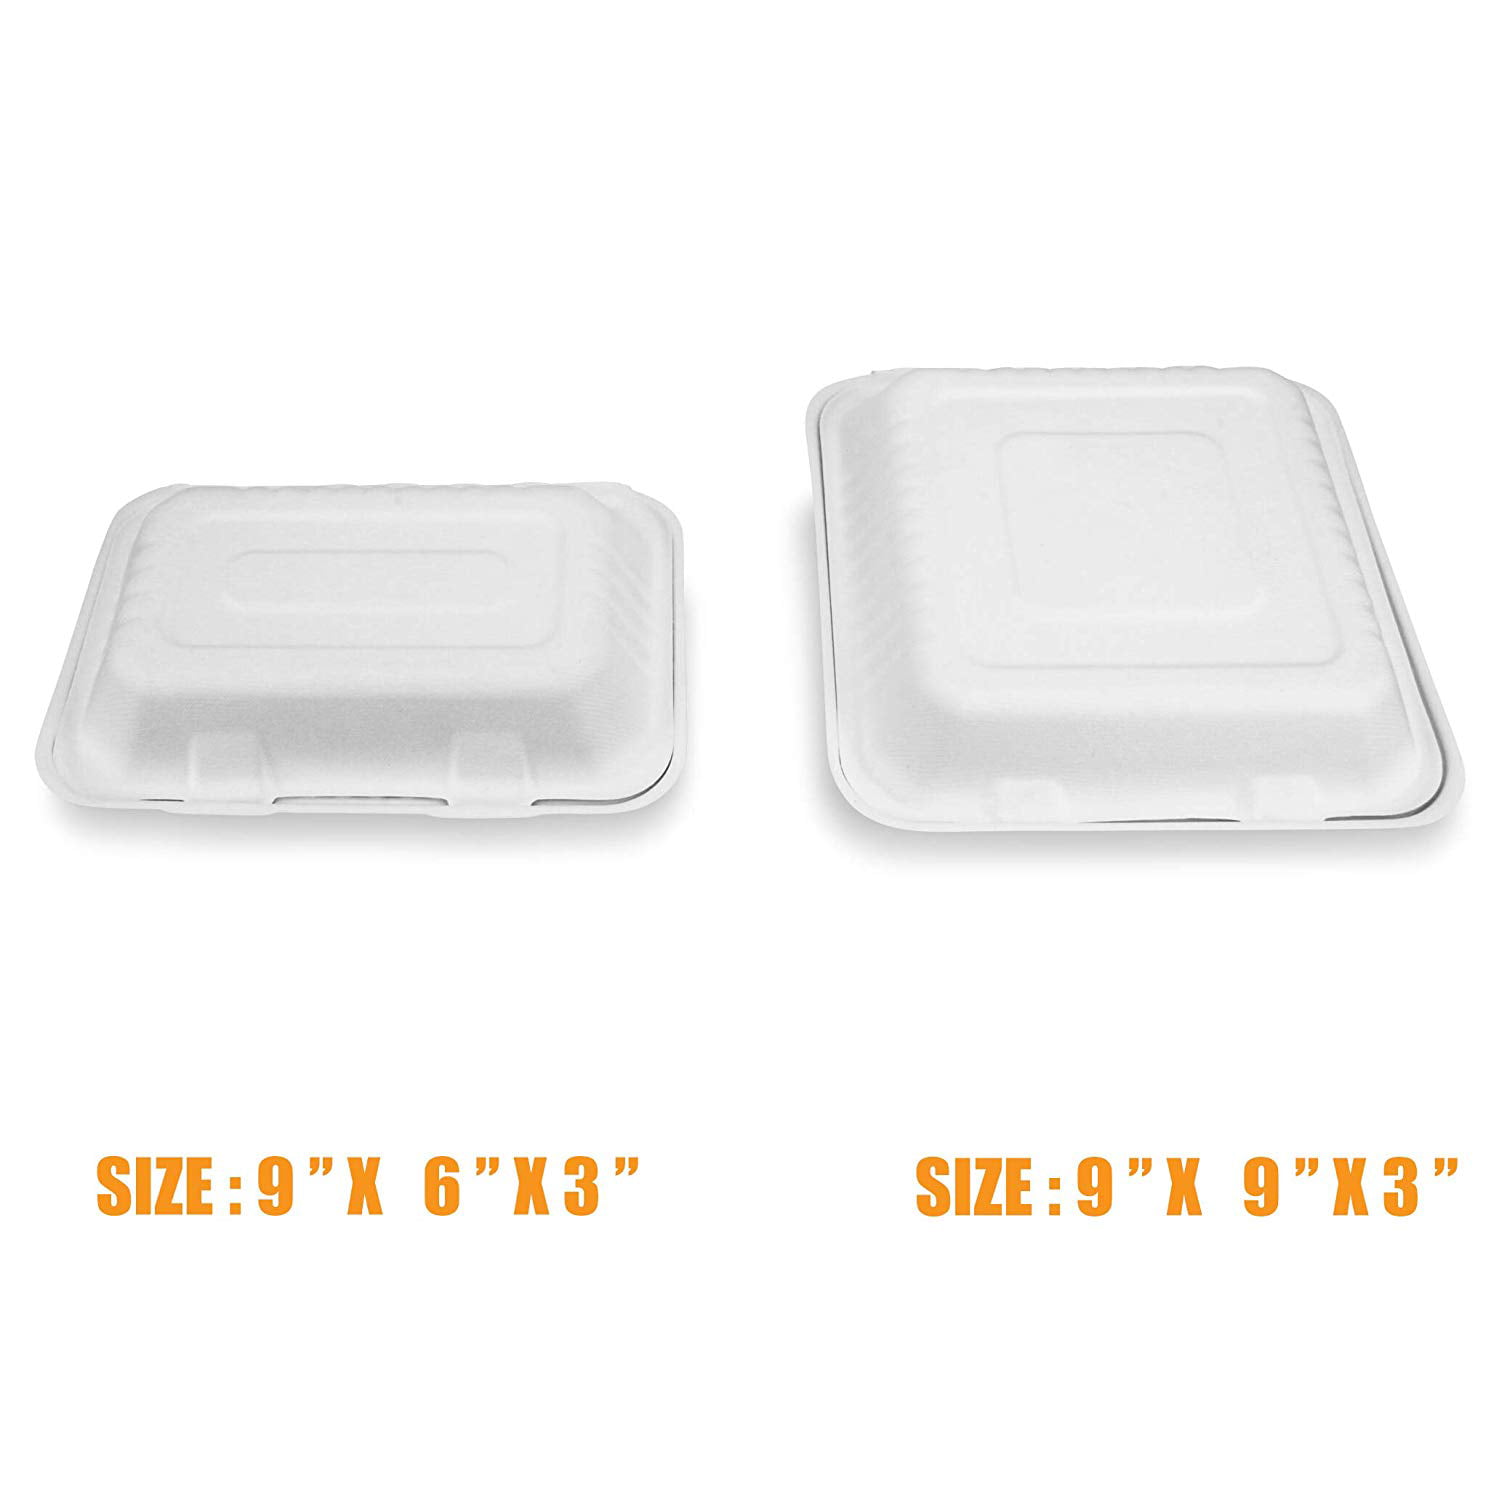 9x9x3 - Compostable Clear PLA Takeout Box (250 count) – BioGreenChoice